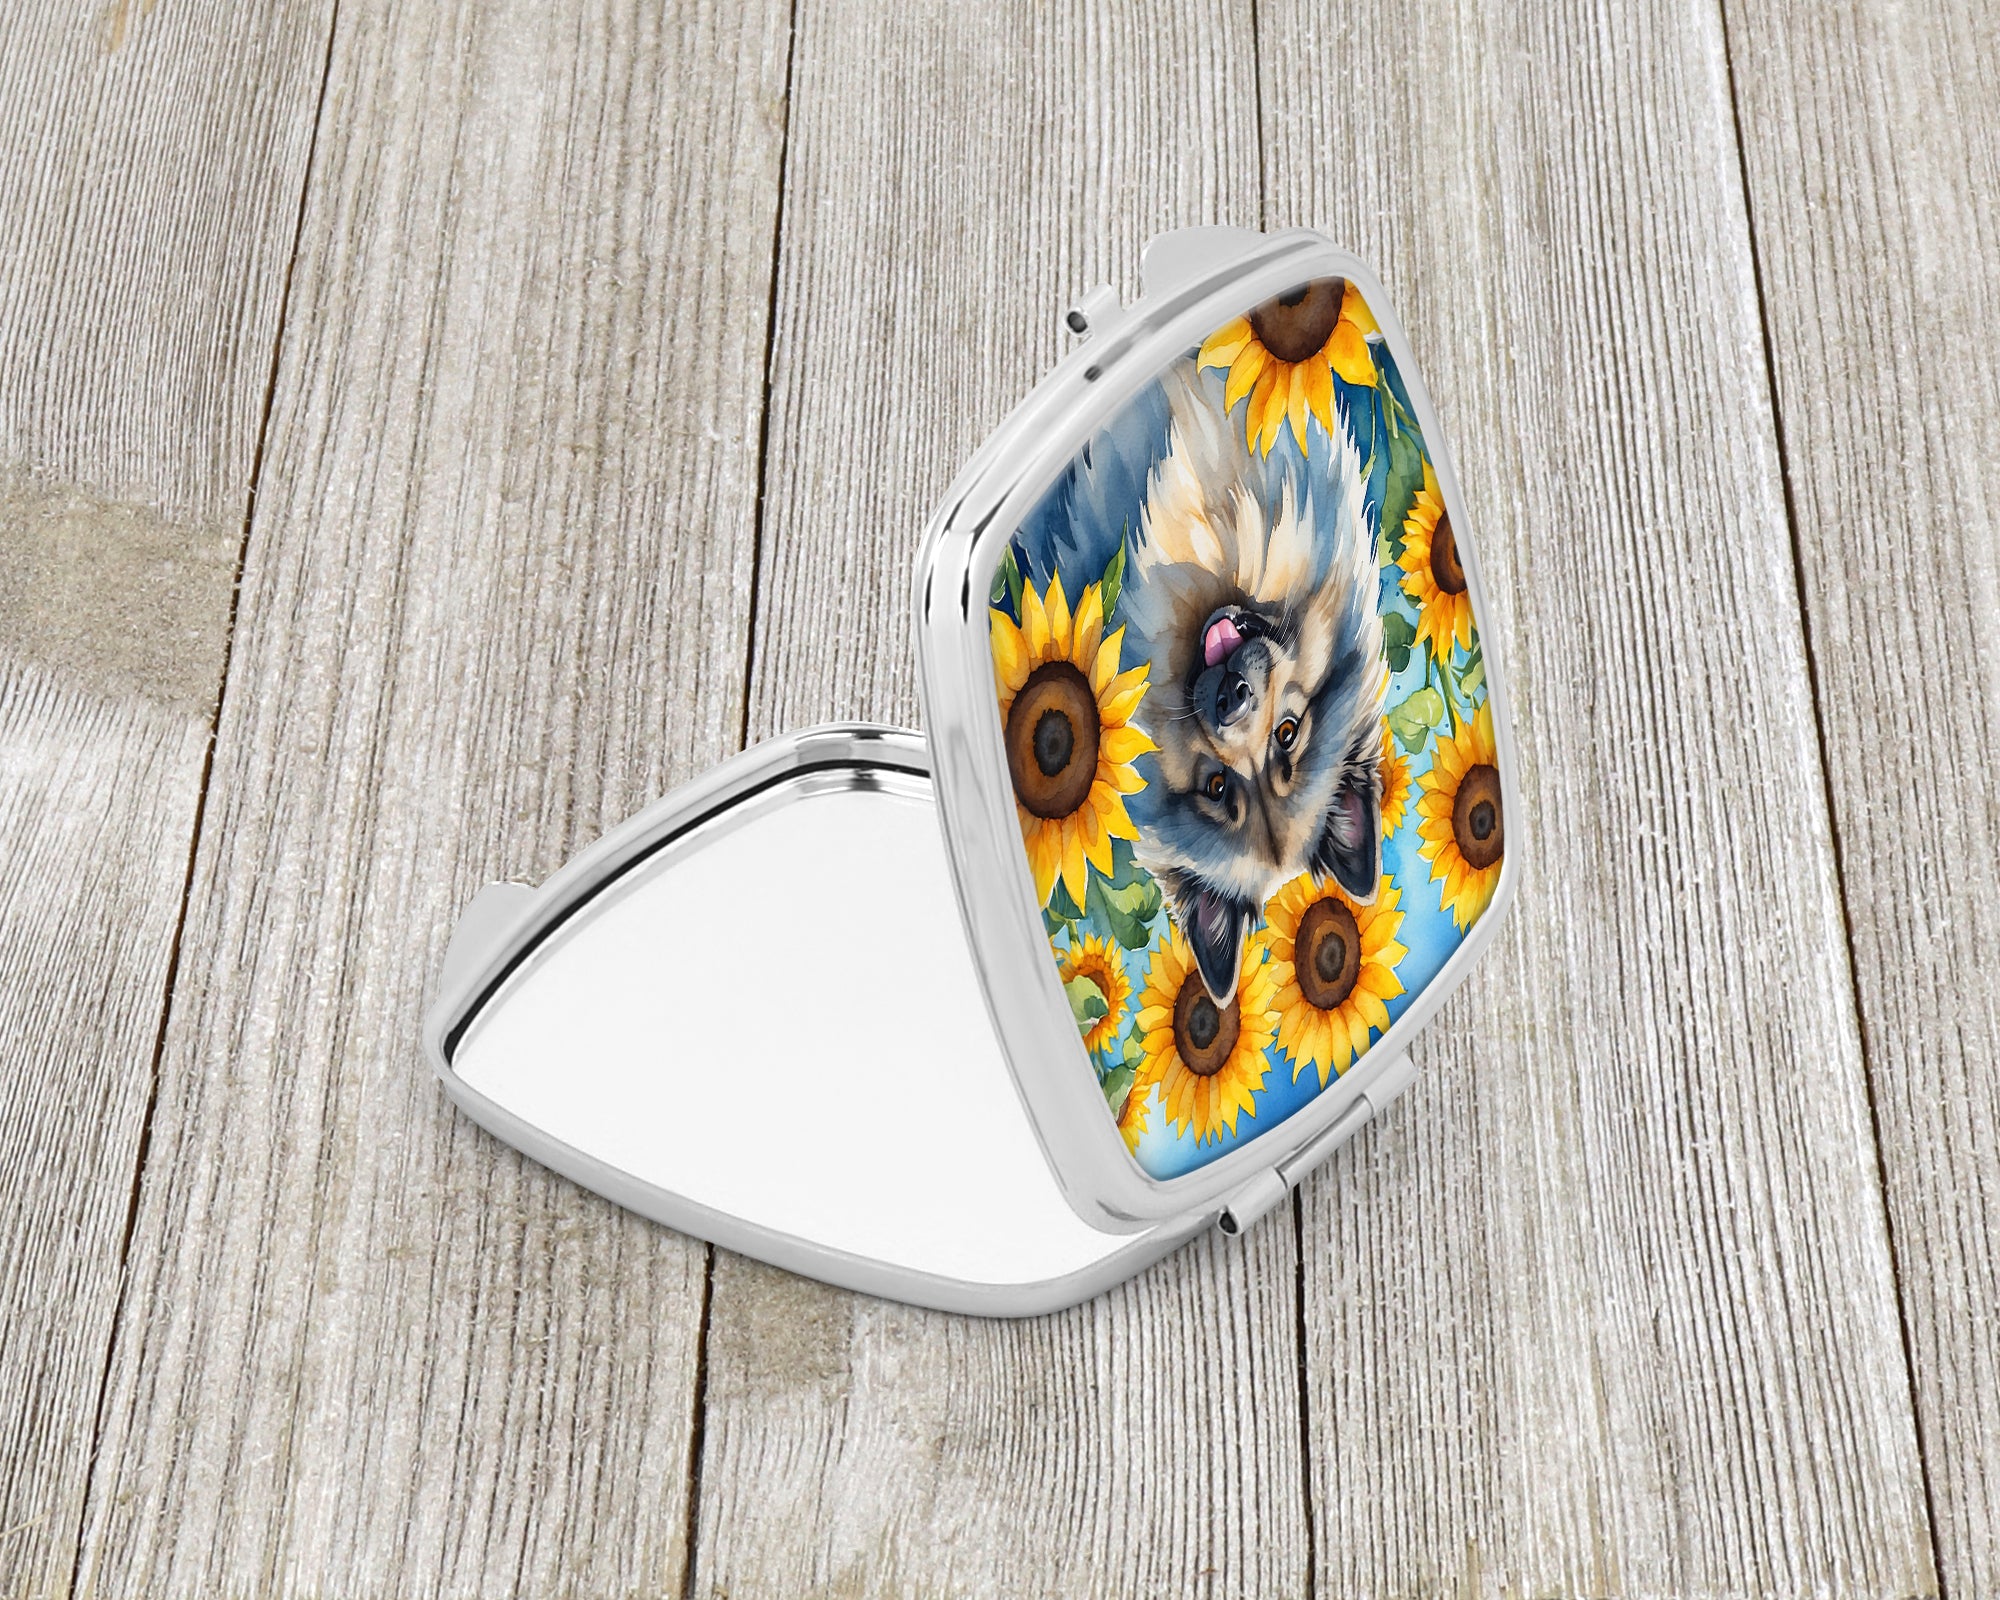 Buy this Keeshond in Sunflowers Compact Mirror